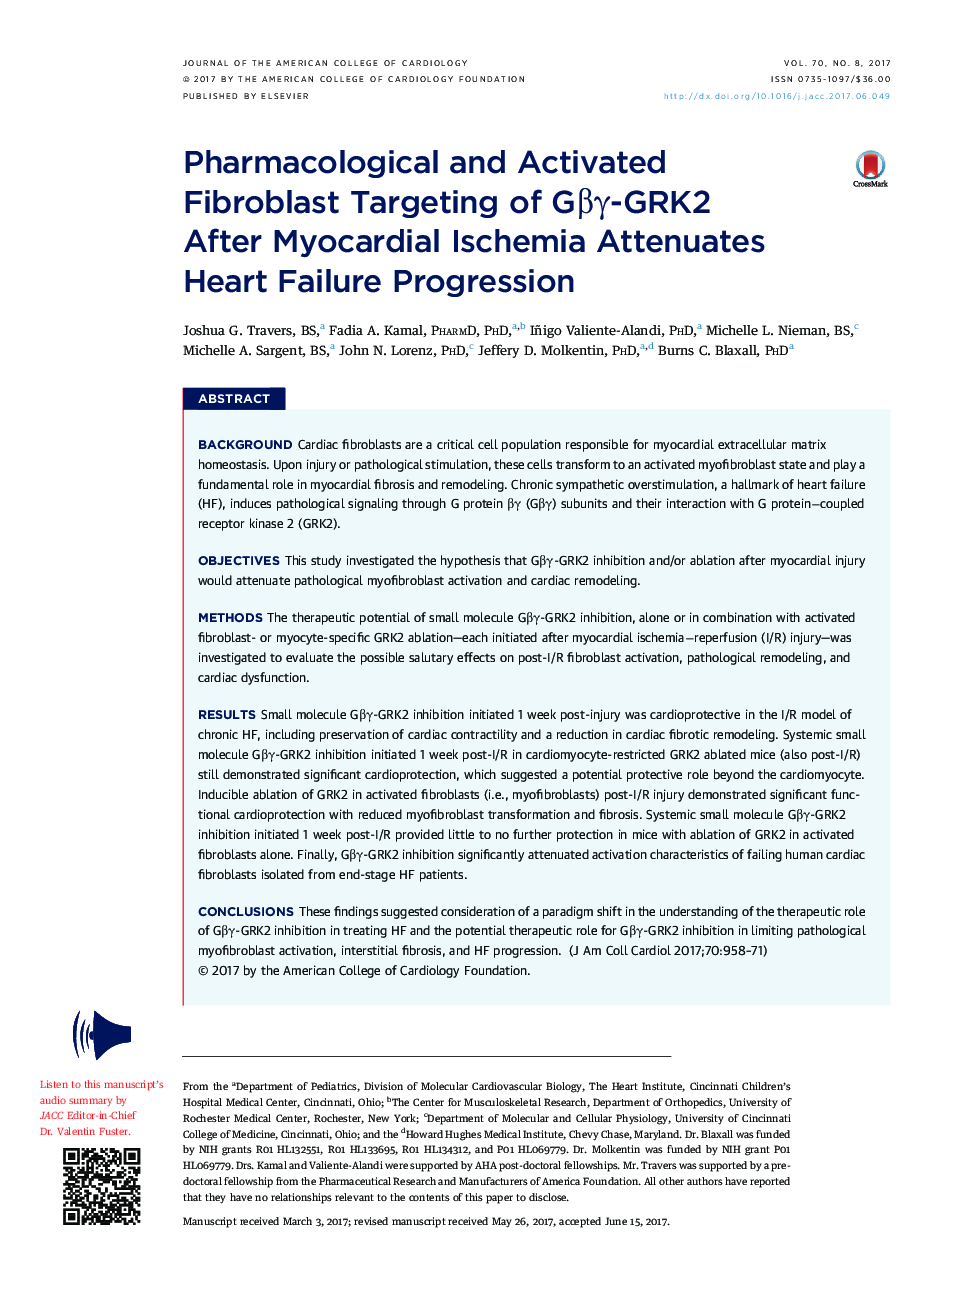 Pharmacological and Activated FibroblastÂ Targeting of GÎ²Î³-GRK2 AfterÂ Myocardial Ischemia Attenuates Heart Failure Progression